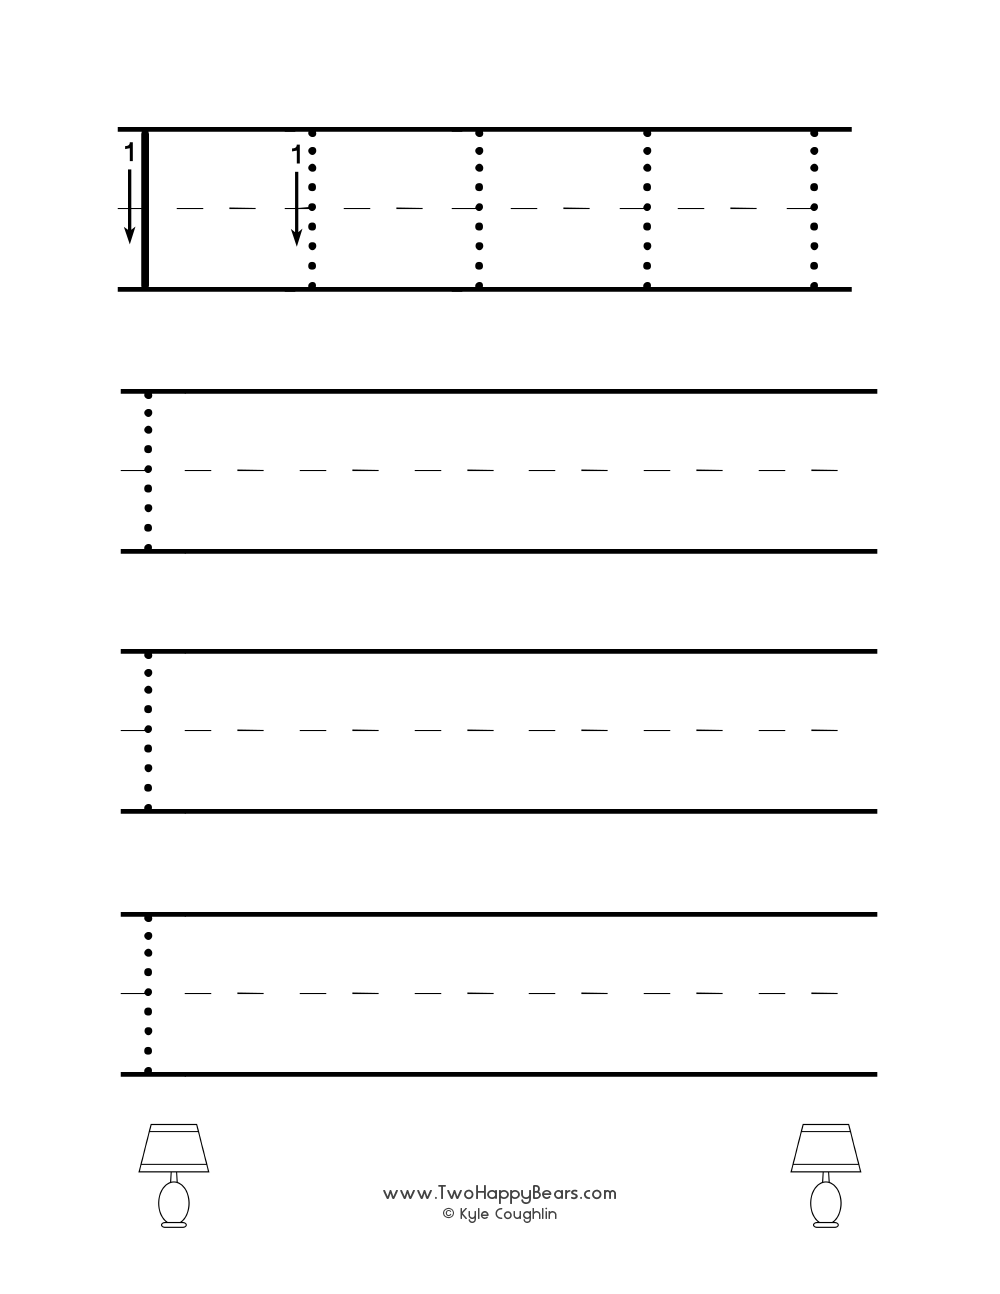 Lowercase letter L worksheet for tracing and drawing